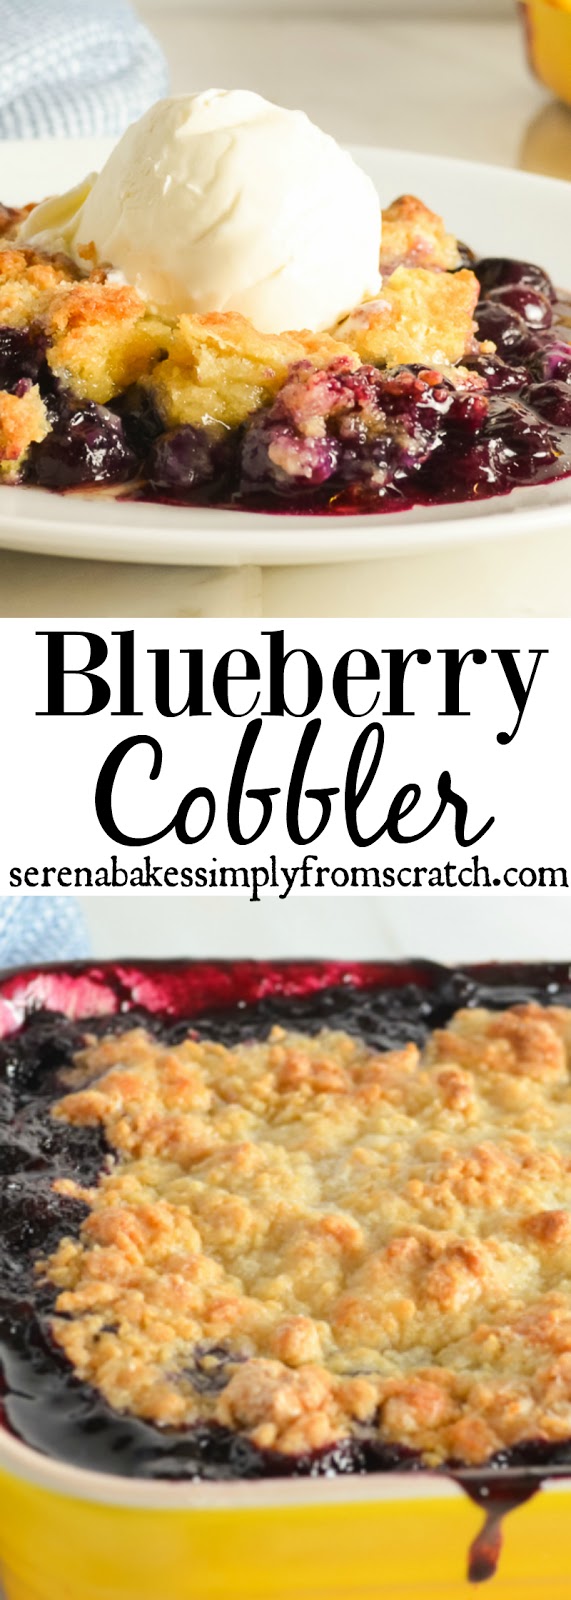 Warm Blueberry Cobbler is easy to make from scratch and perfect for summertime picnics, barbecues, and potlucks.